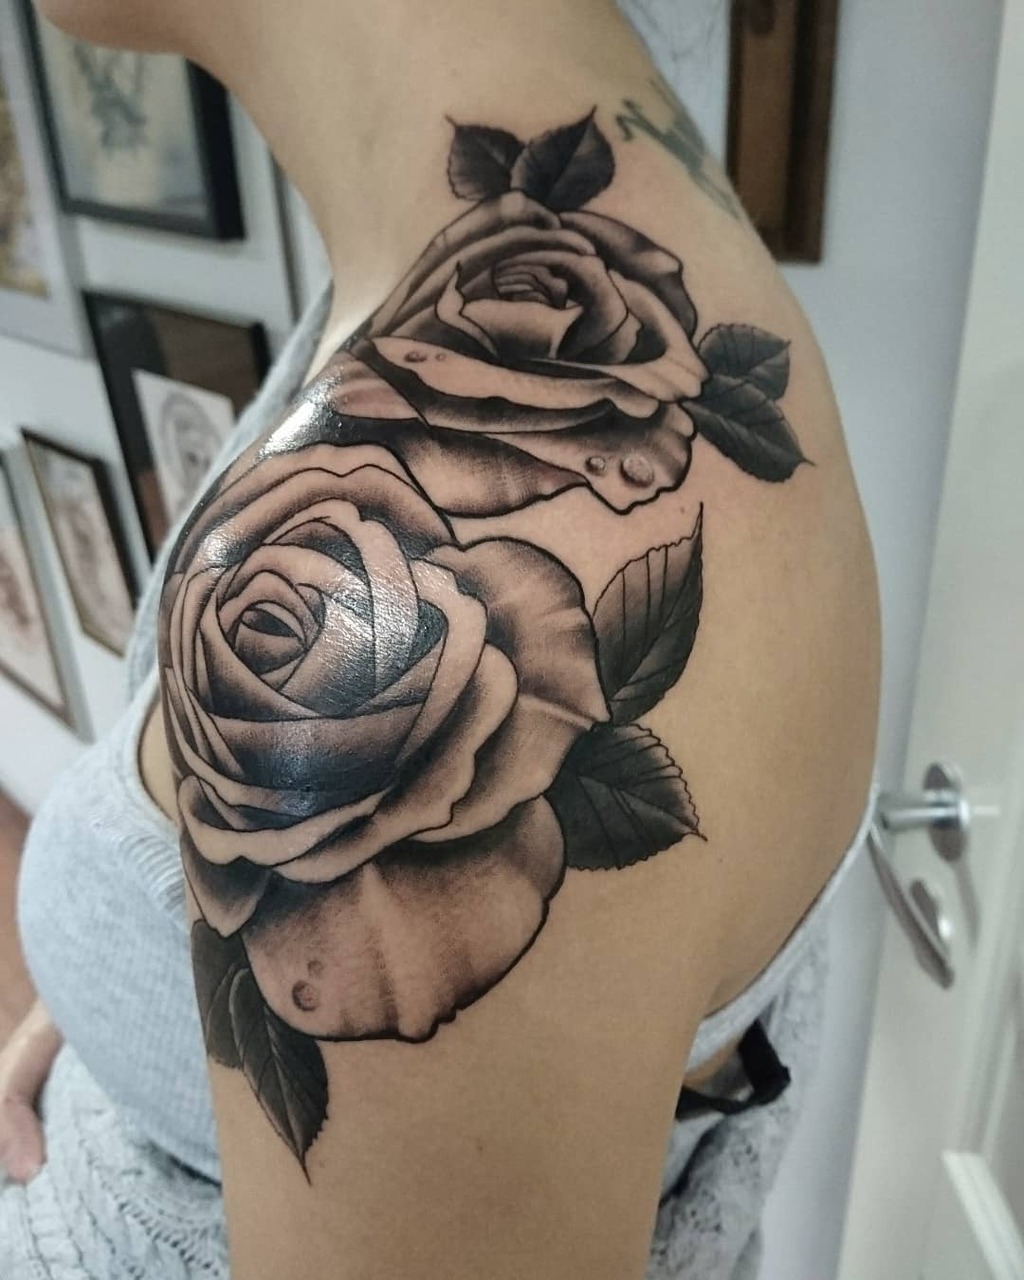 20+ Rose Hand Tattoo Ideas You Have To See To Believe! - alexie